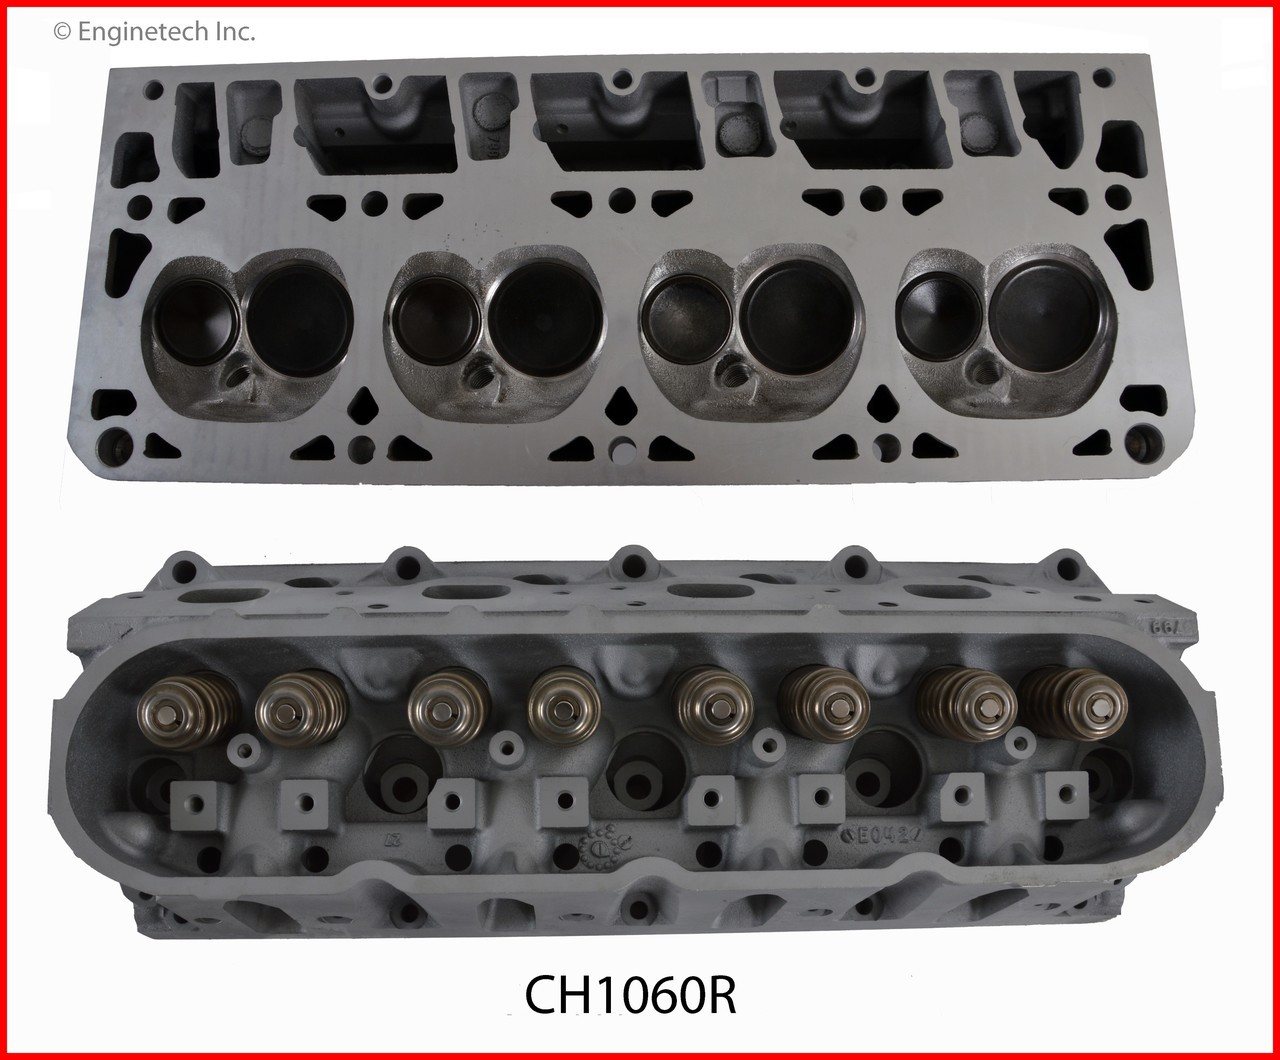 Cylinder Head Assembly - 2007 Cadillac CTS 6.0L (CH1060R.K132)